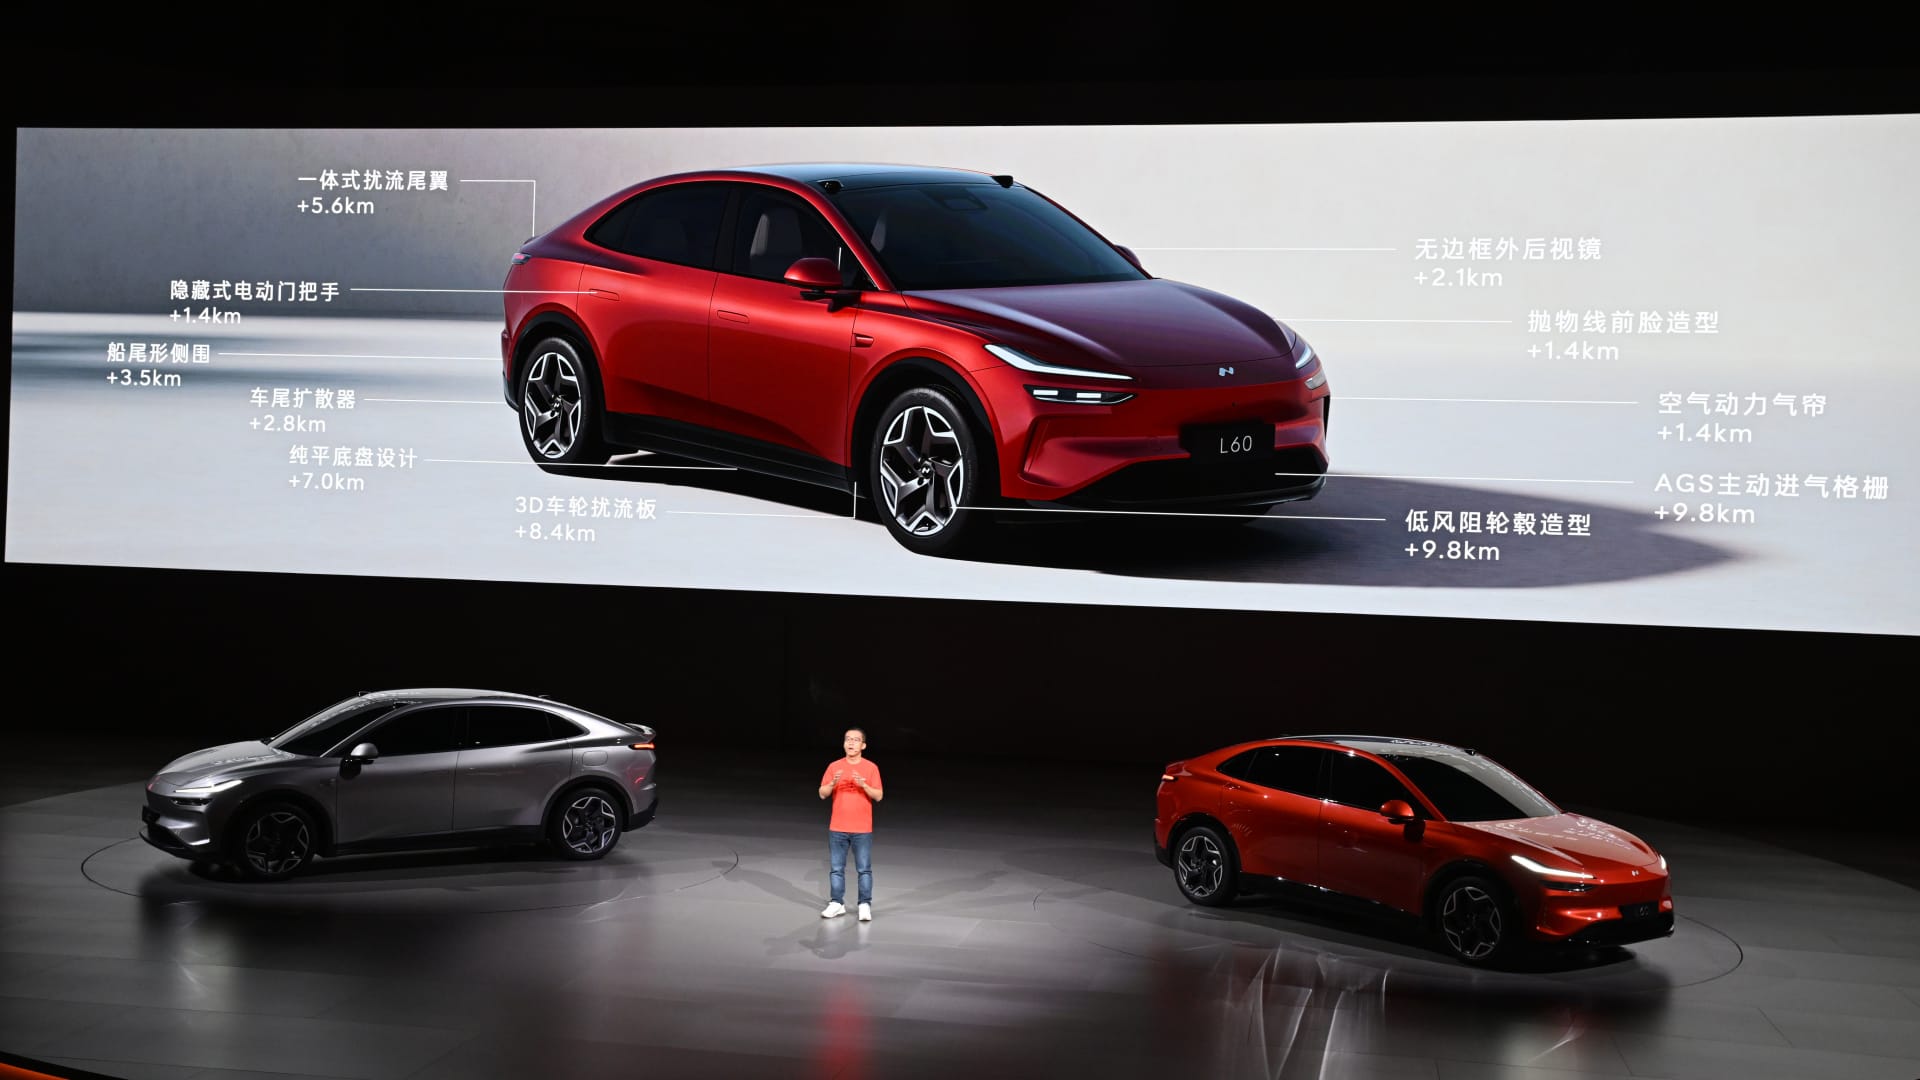 Nio is changing its global strategy with U.S., EU tariffs on the horizon [Video]